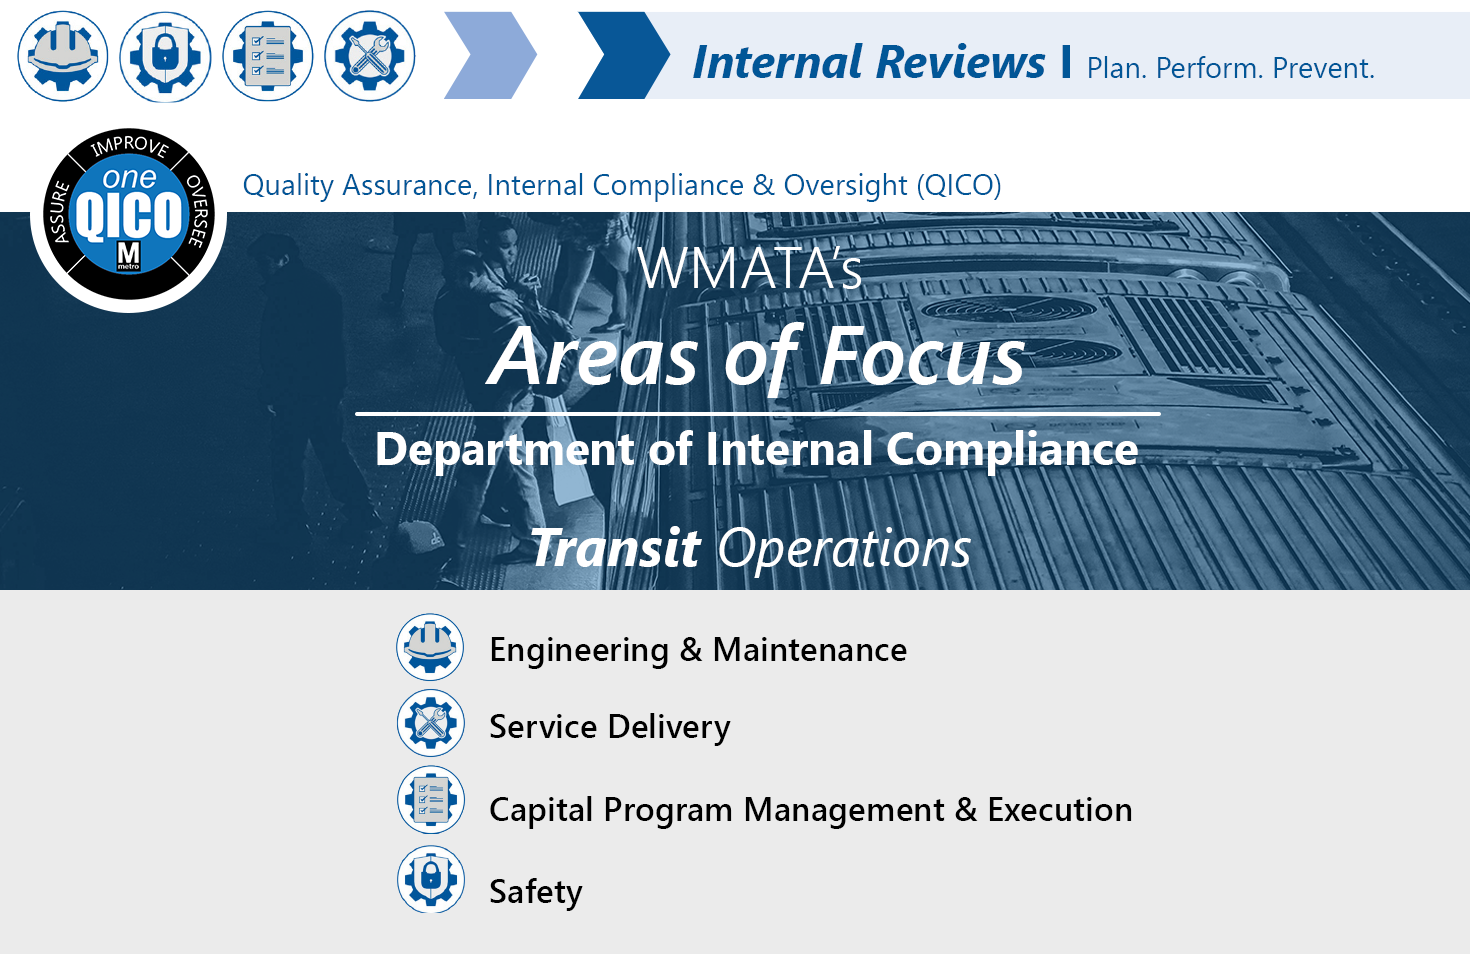 Quality Assurance, Internal Compliance & Oversight (QICO) Internal Review - WMATA's Areas of Focus: Transit Operations Engineering & Maintenance, Service Delivery, Capital Program Management & Execution, Safety